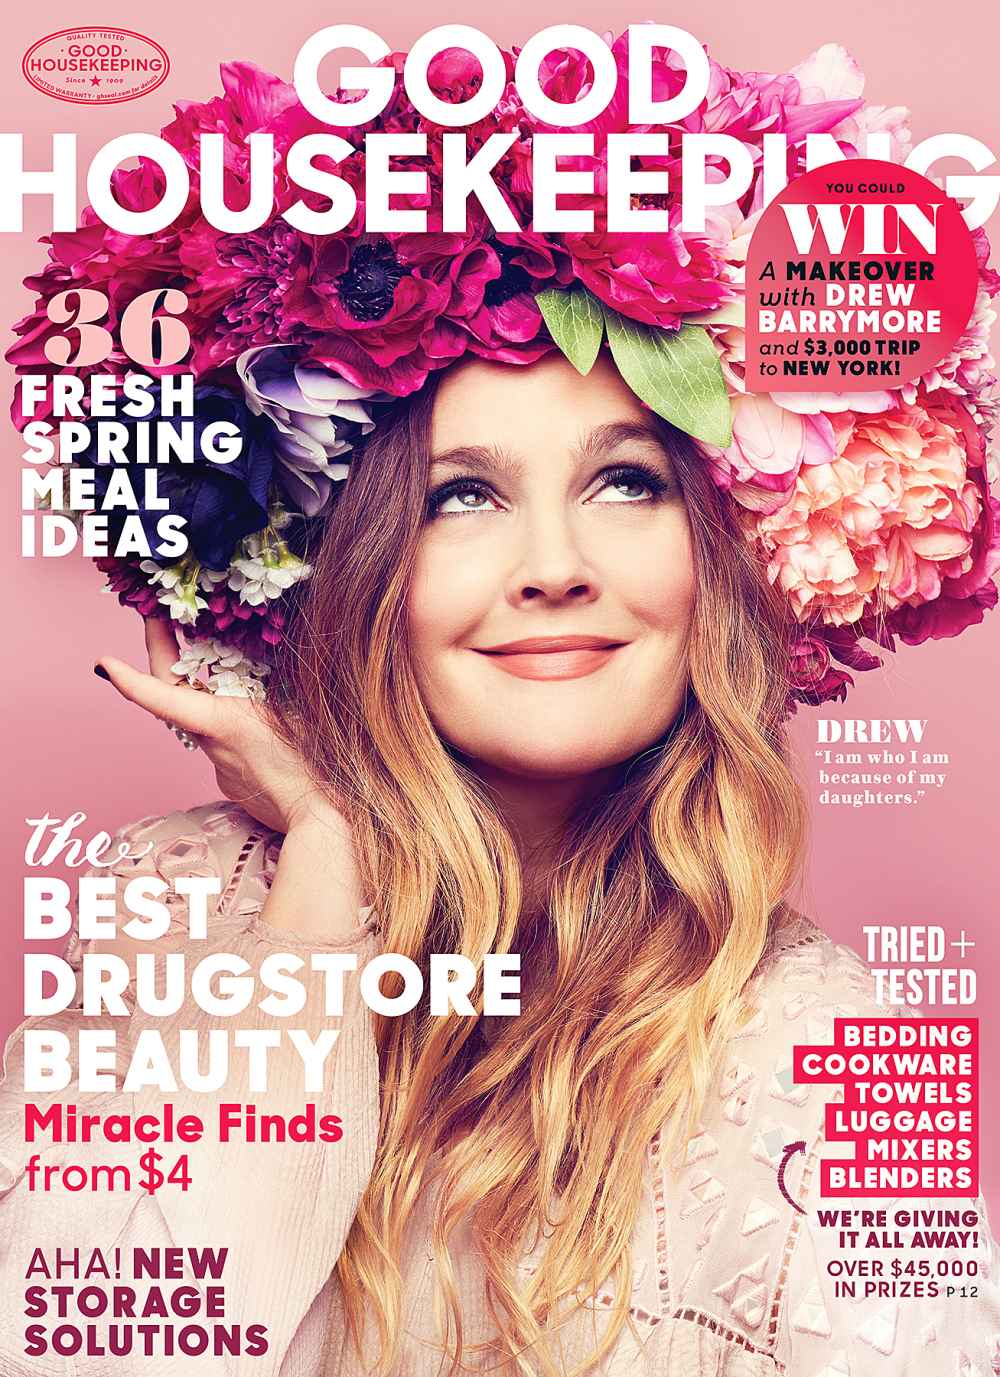 Drew Barrymore on the cover of Good Housekeeping